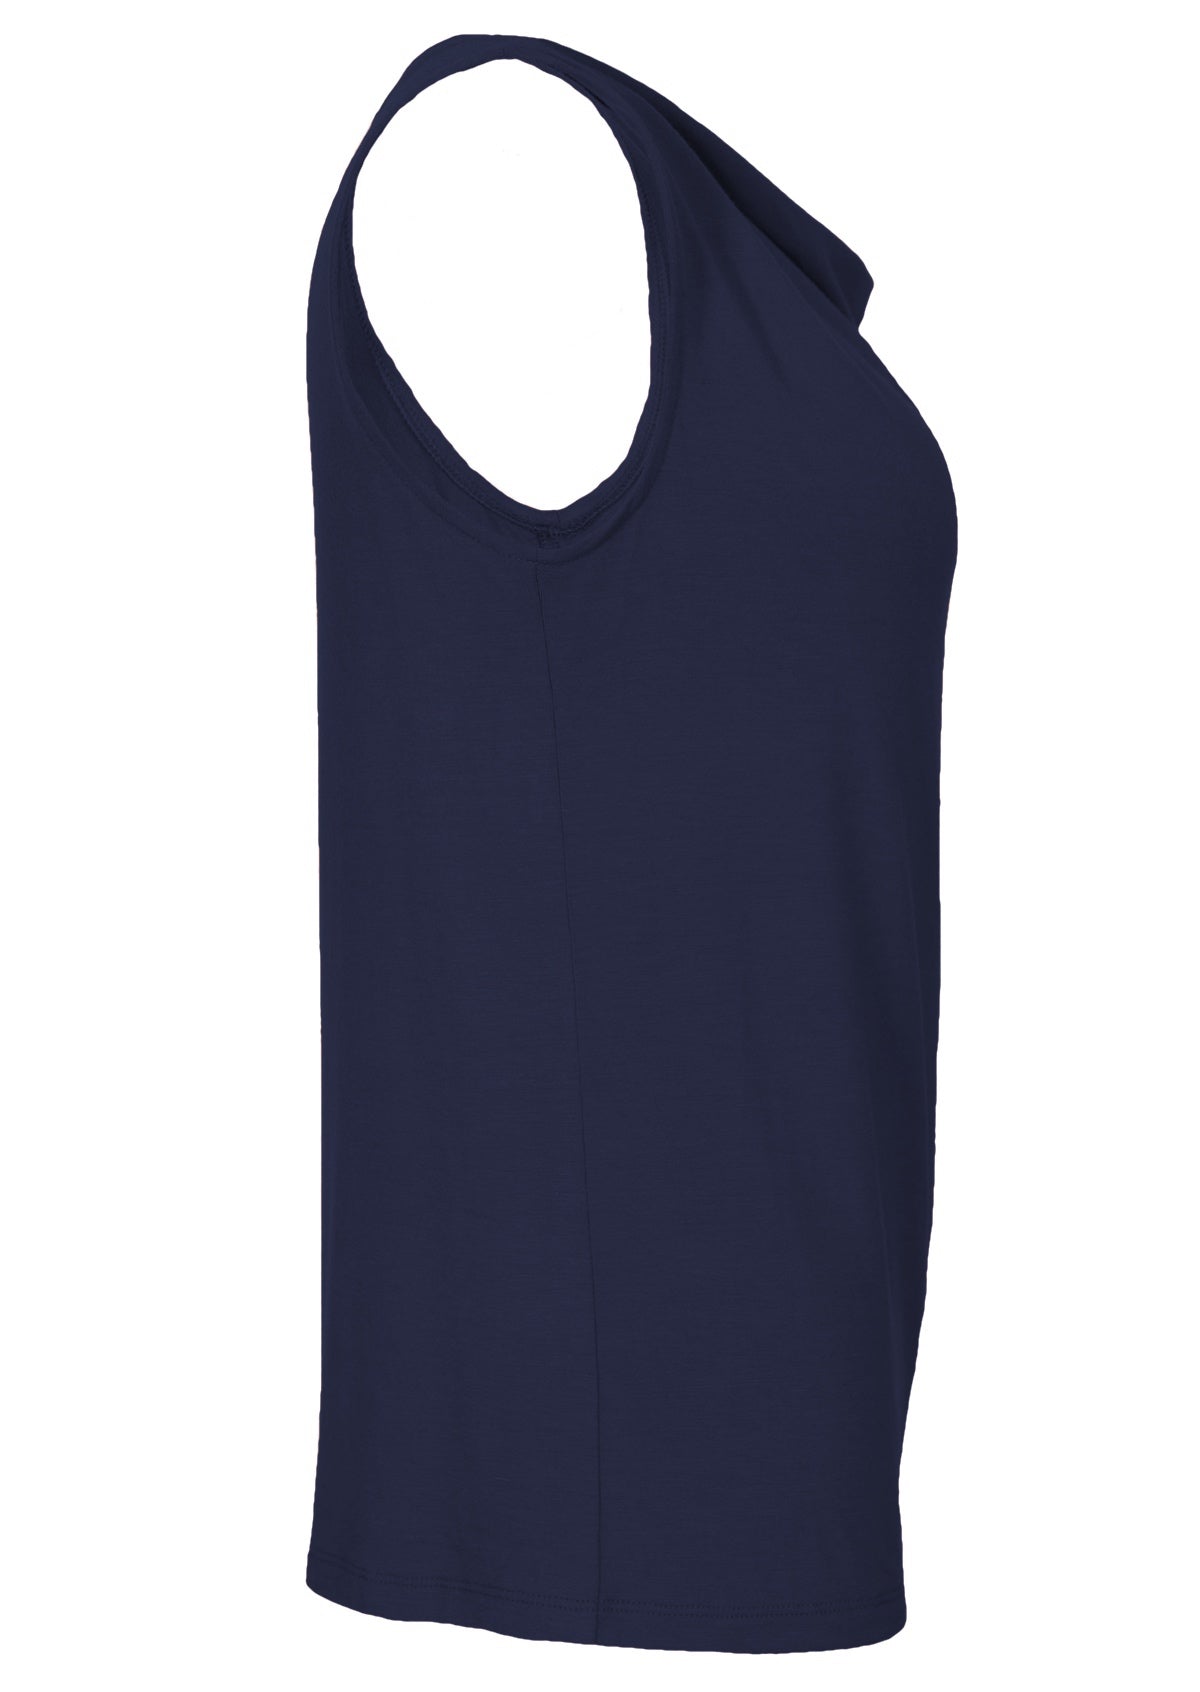 side view sleeveless stretch rayon top navy blue